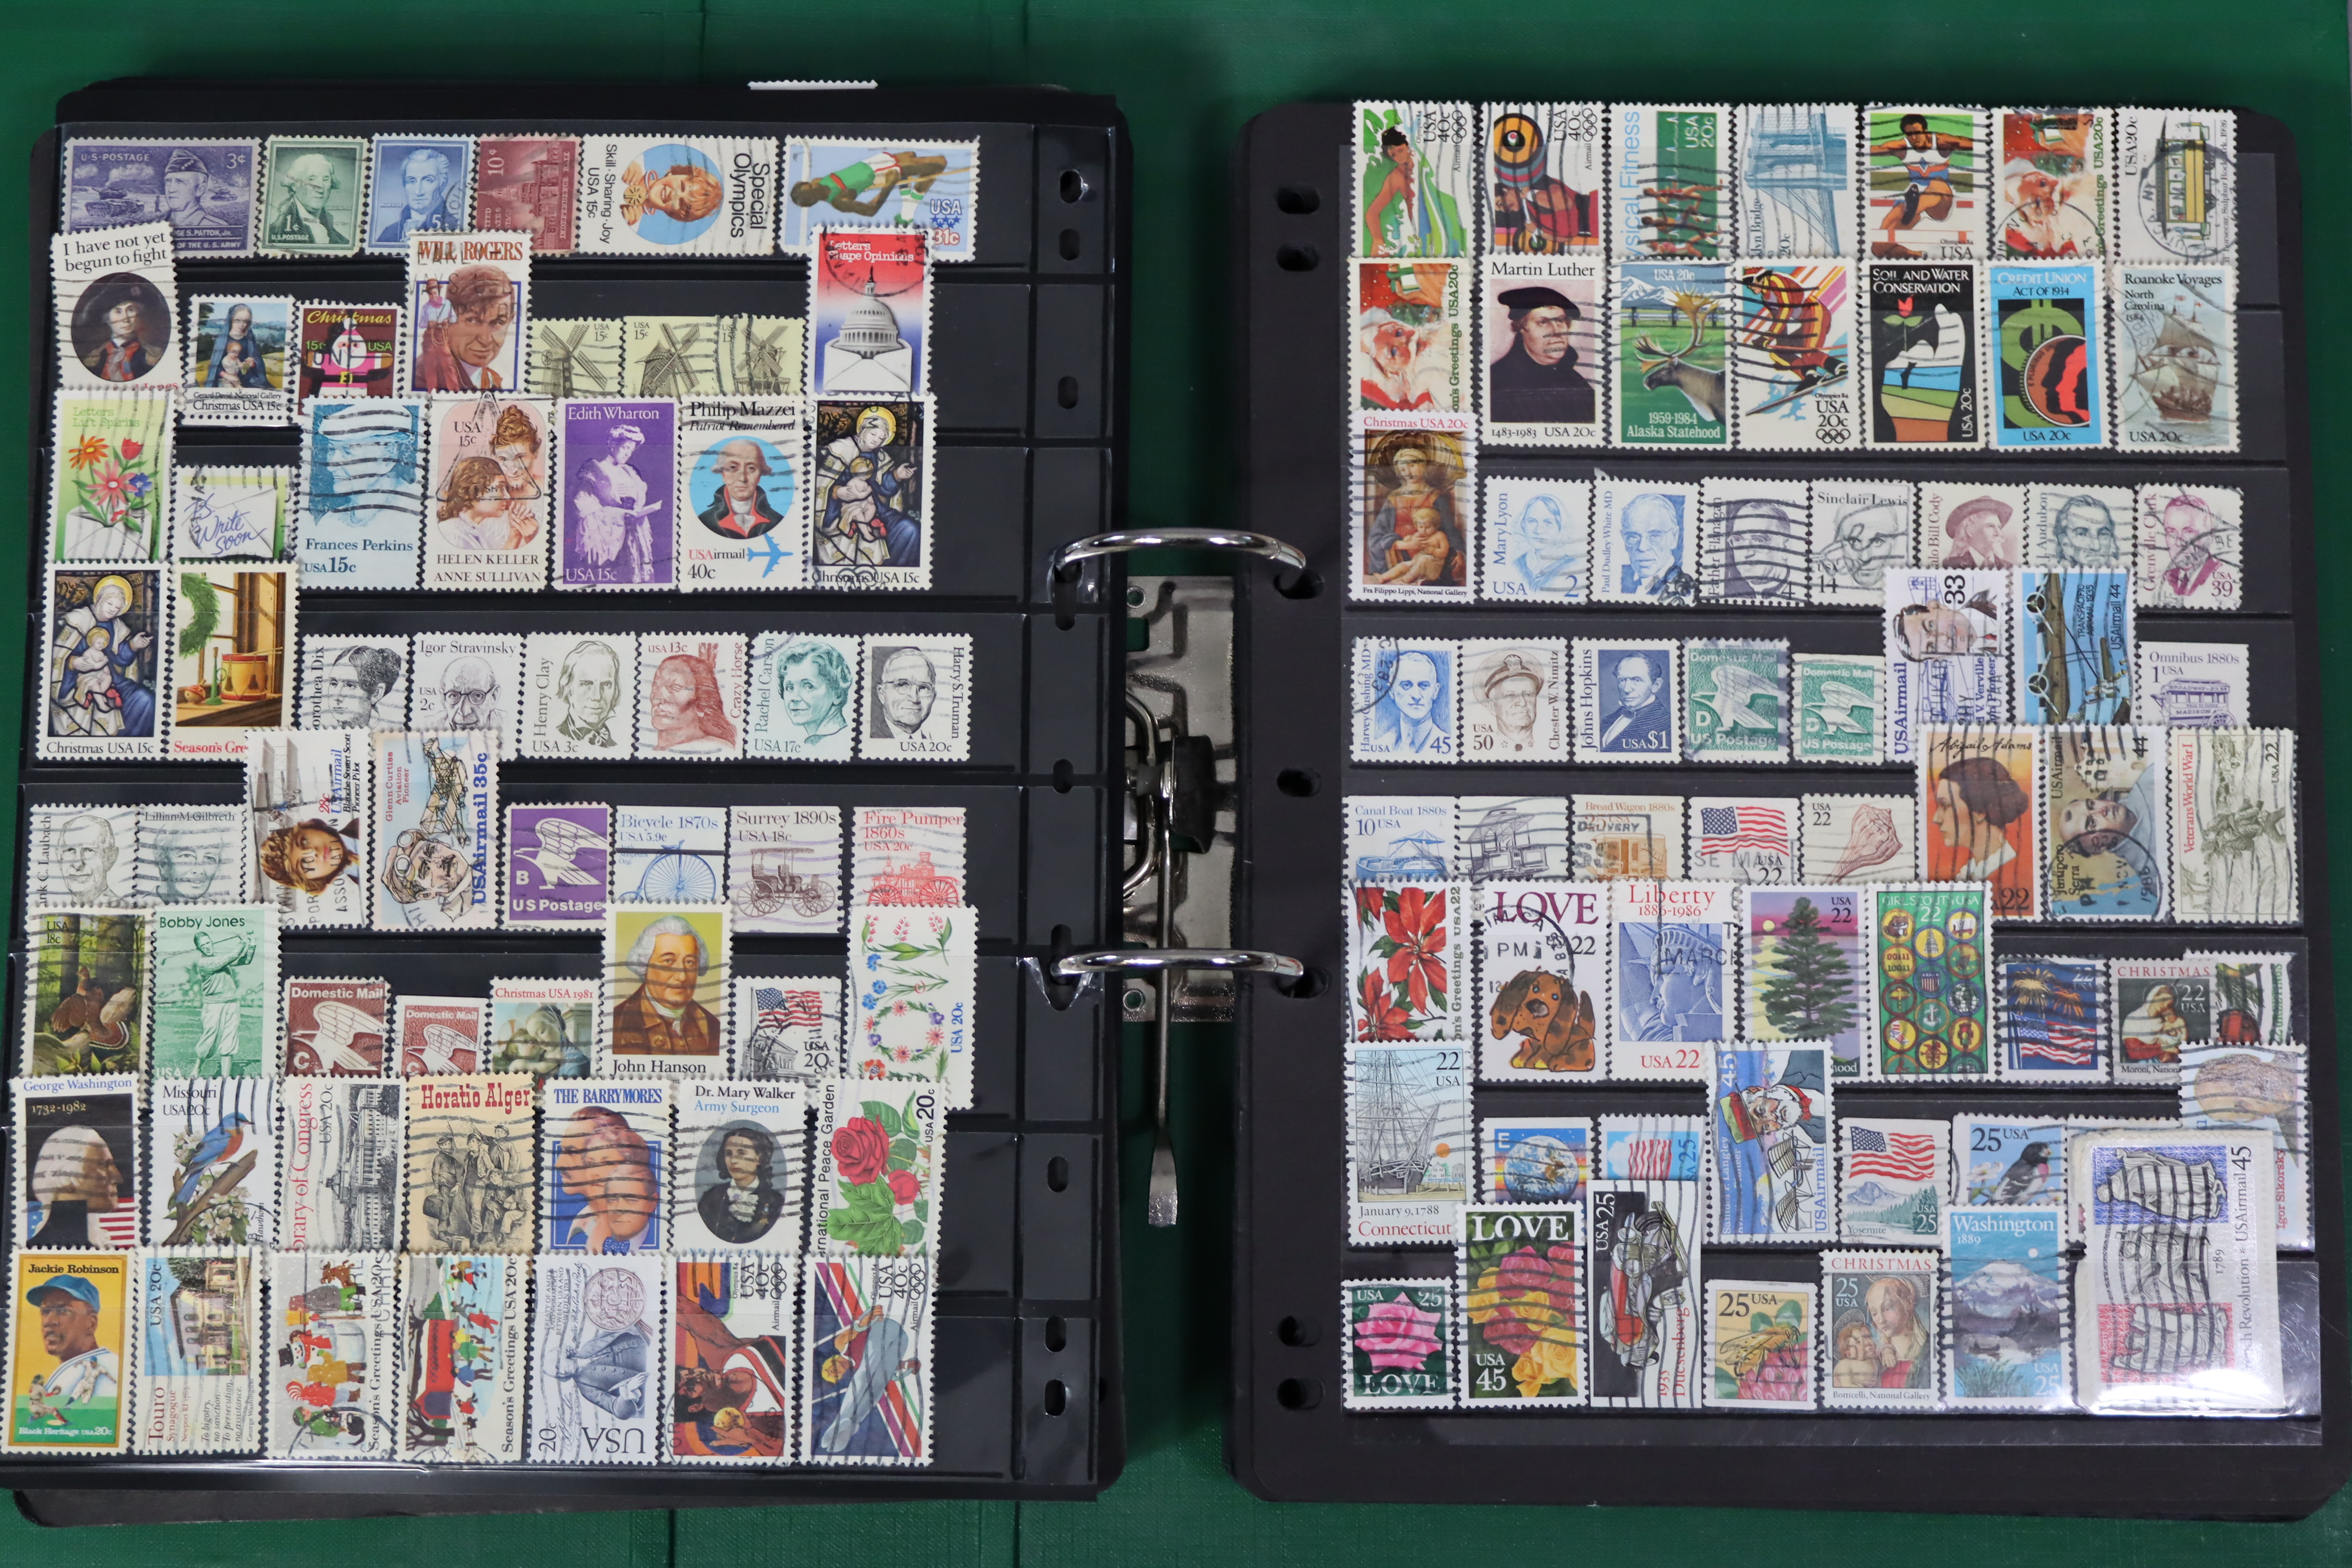 A collection of GB commonwealth & world stamps on stock leaves, in a ring-binder album. - Image 3 of 5